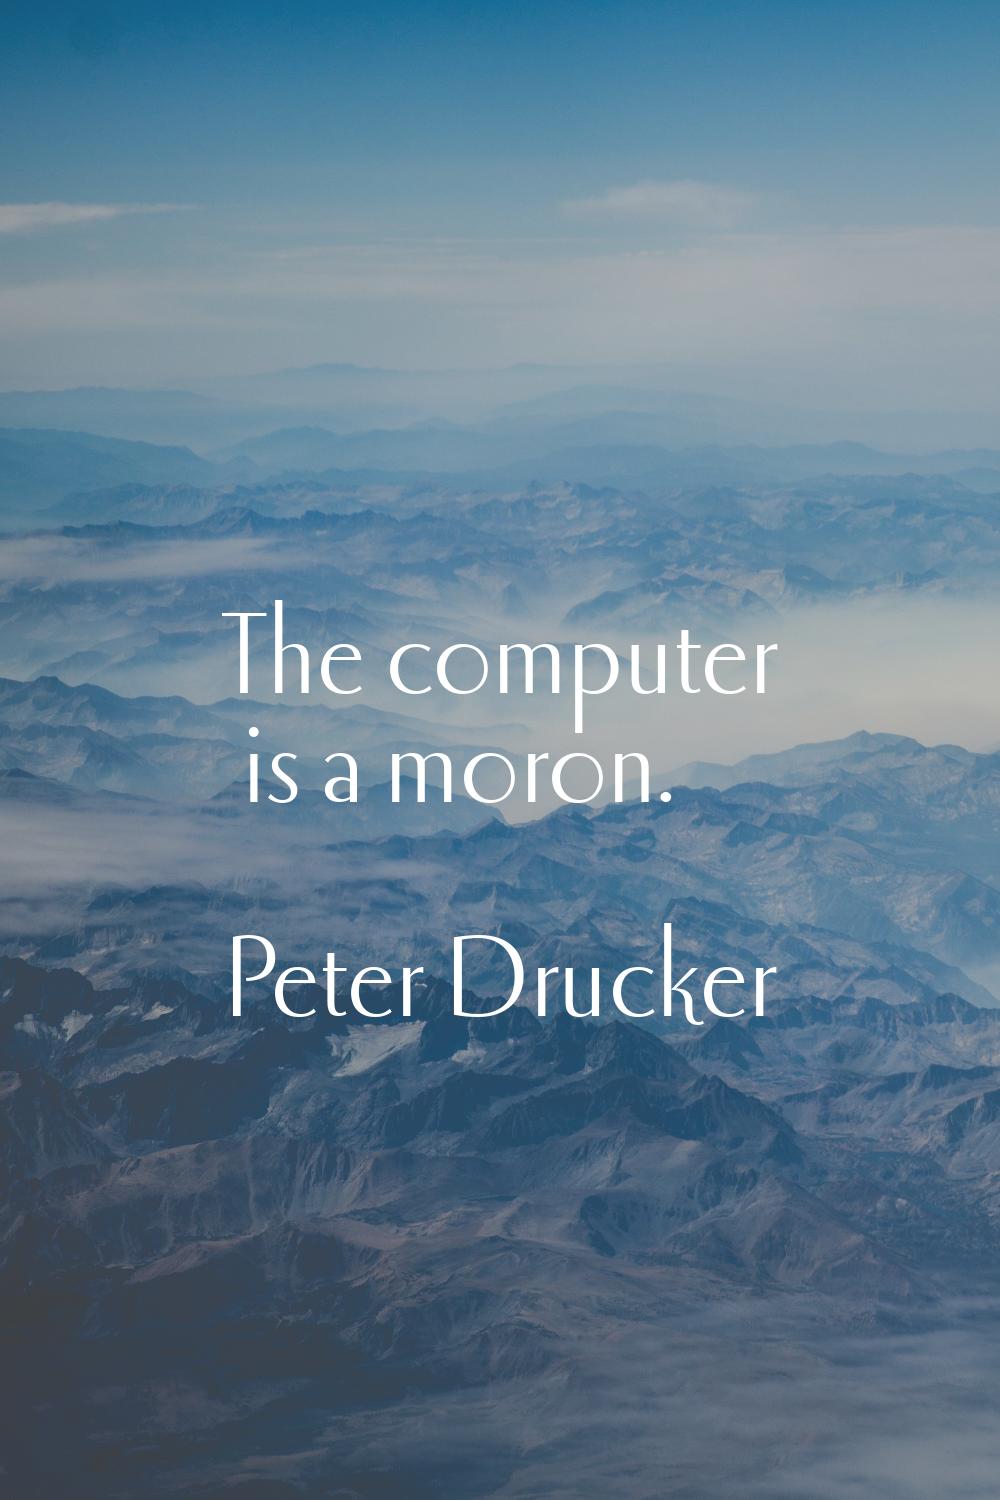 The computer is a moron.